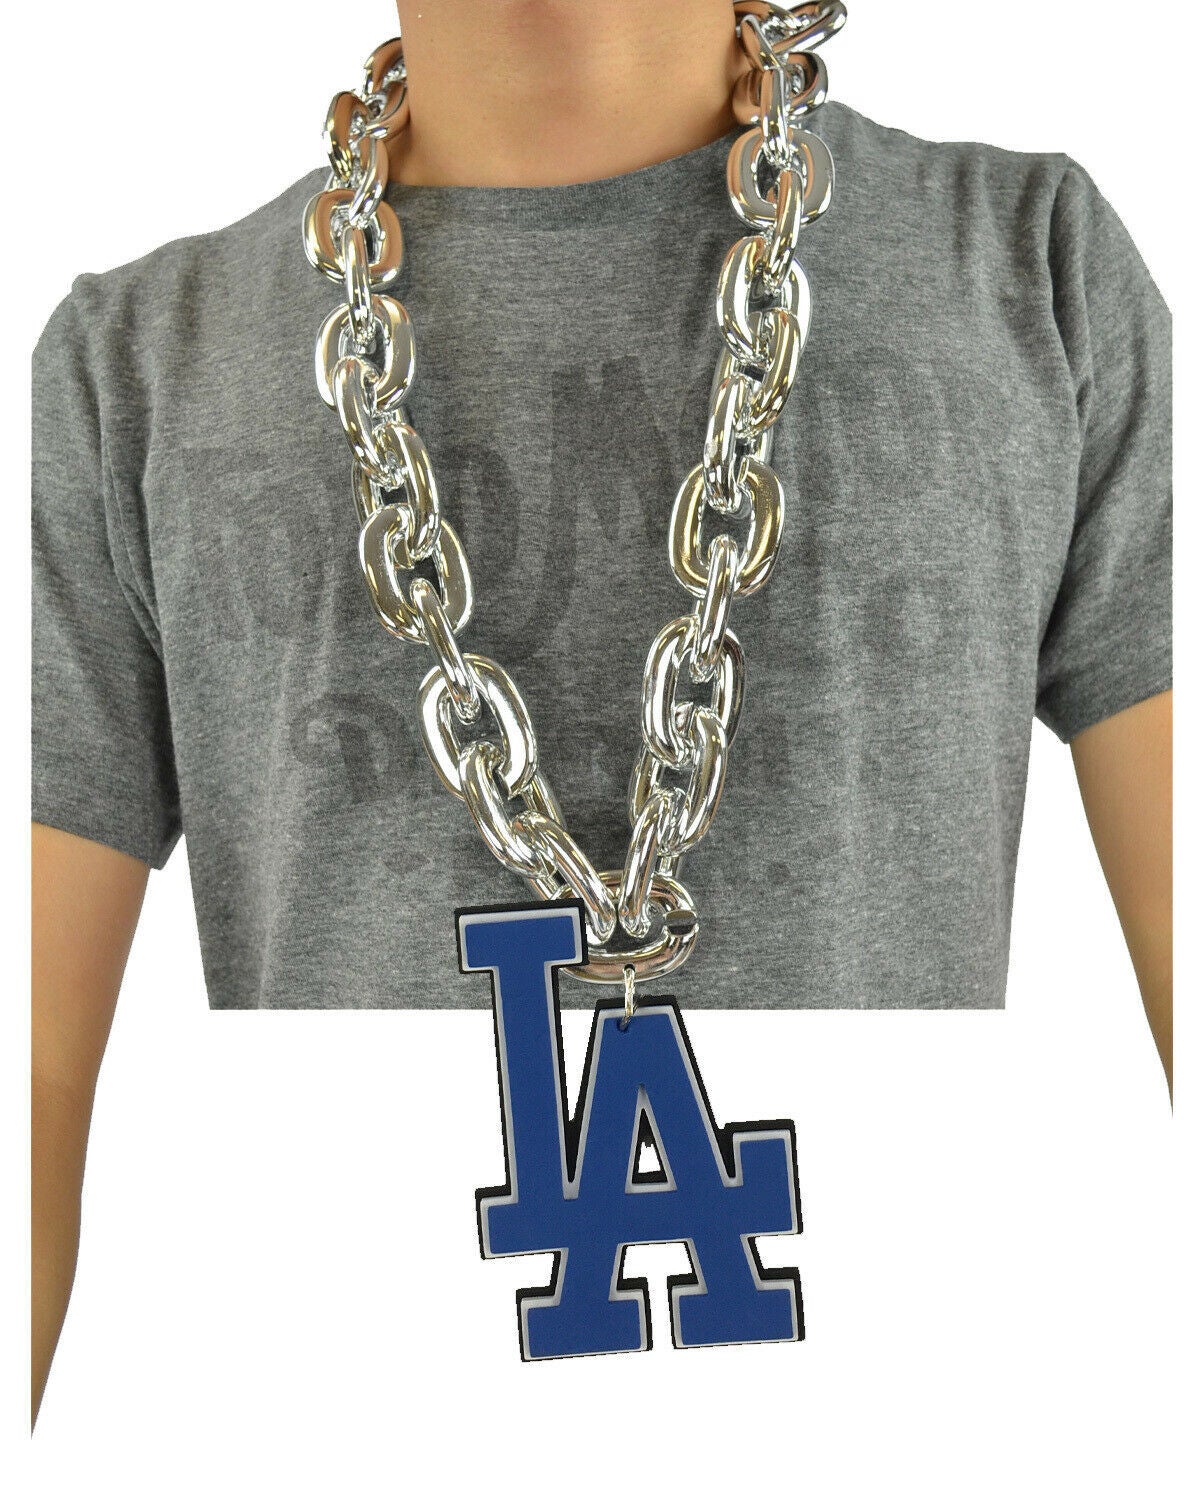 Fanfave Los Angeles Lakers NBA Fan Chain Necklace